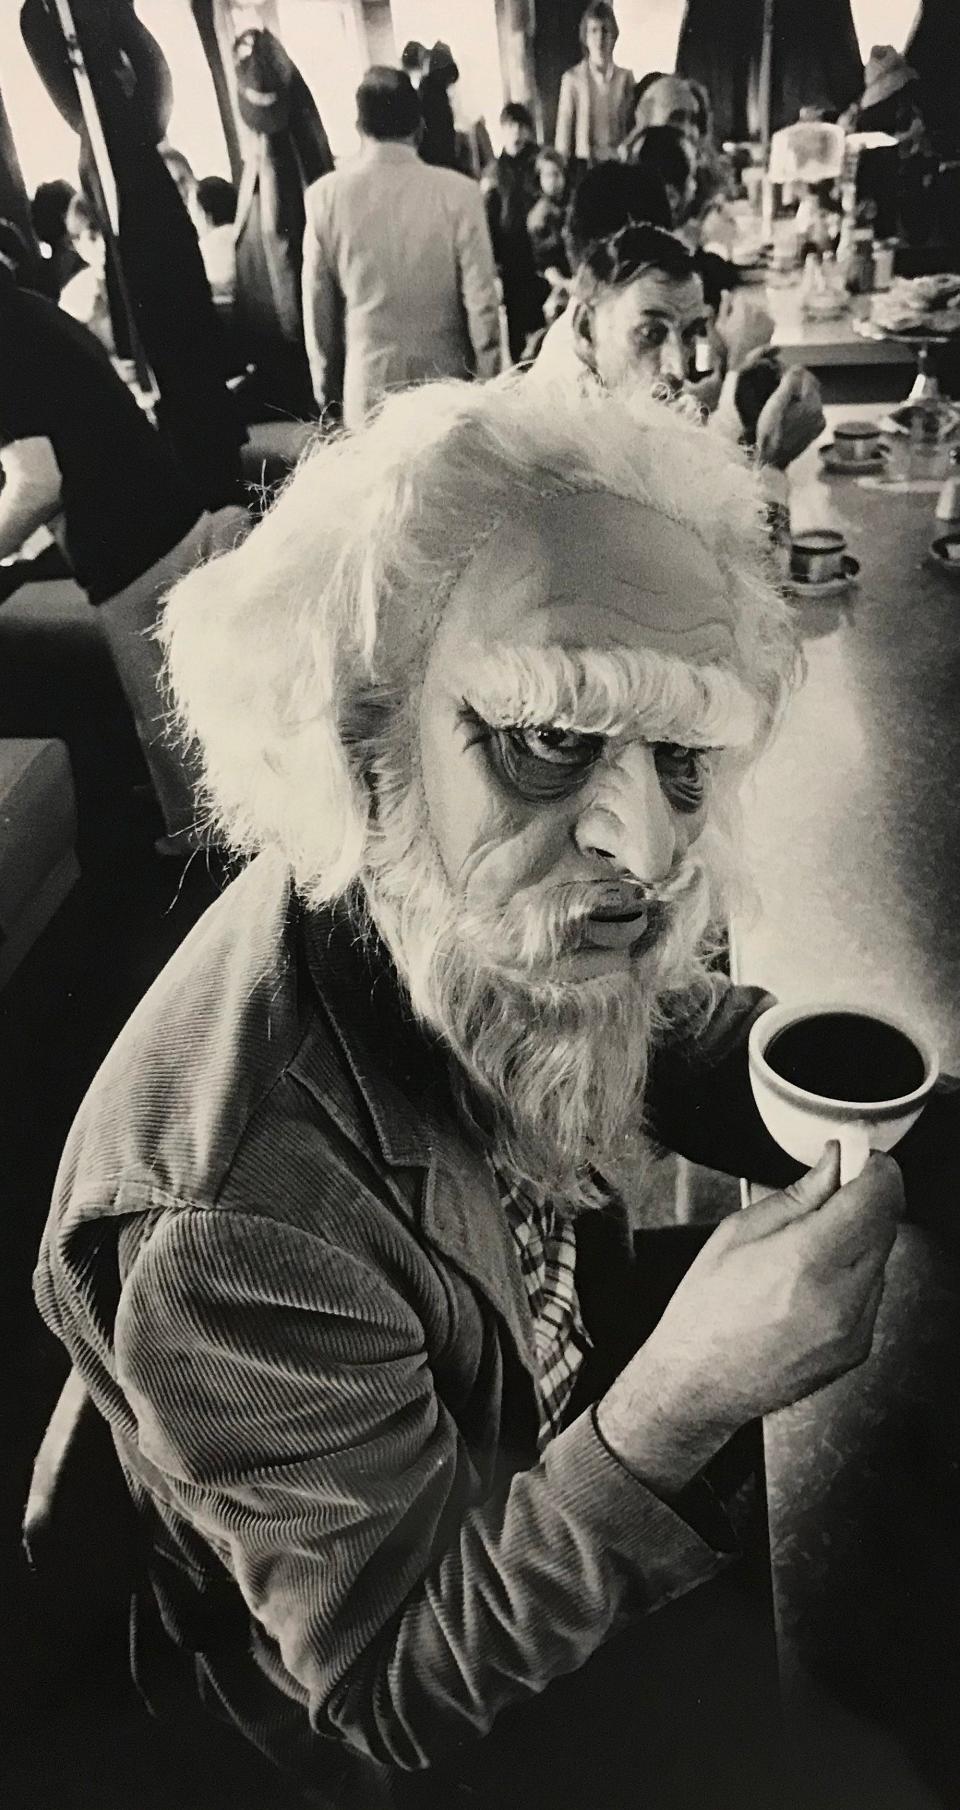 Bob Wilson, of Elkton, Md., came to Newark to do some shopping. Obviously, he didn't need a Halloween costume when he stopped for a cup of coffee at Jimmy's Diner in this undated photograph.